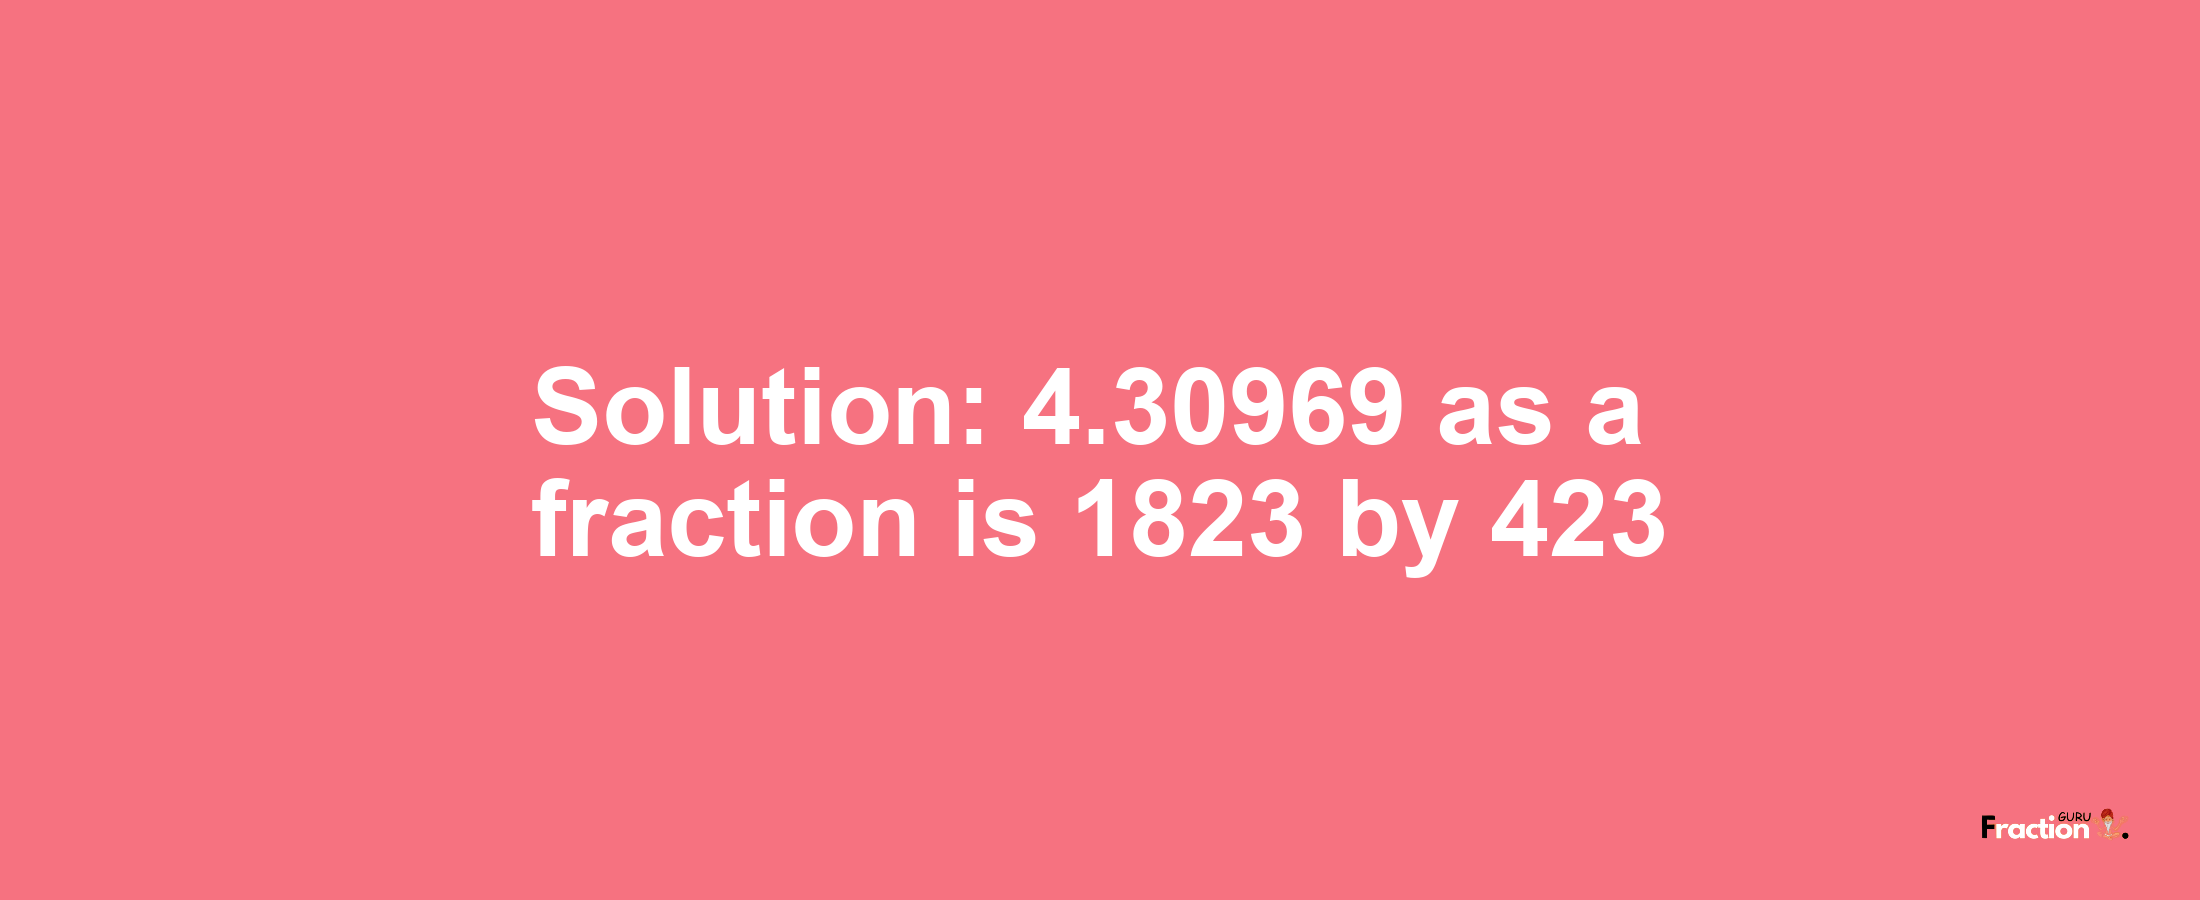 Solution:4.30969 as a fraction is 1823/423